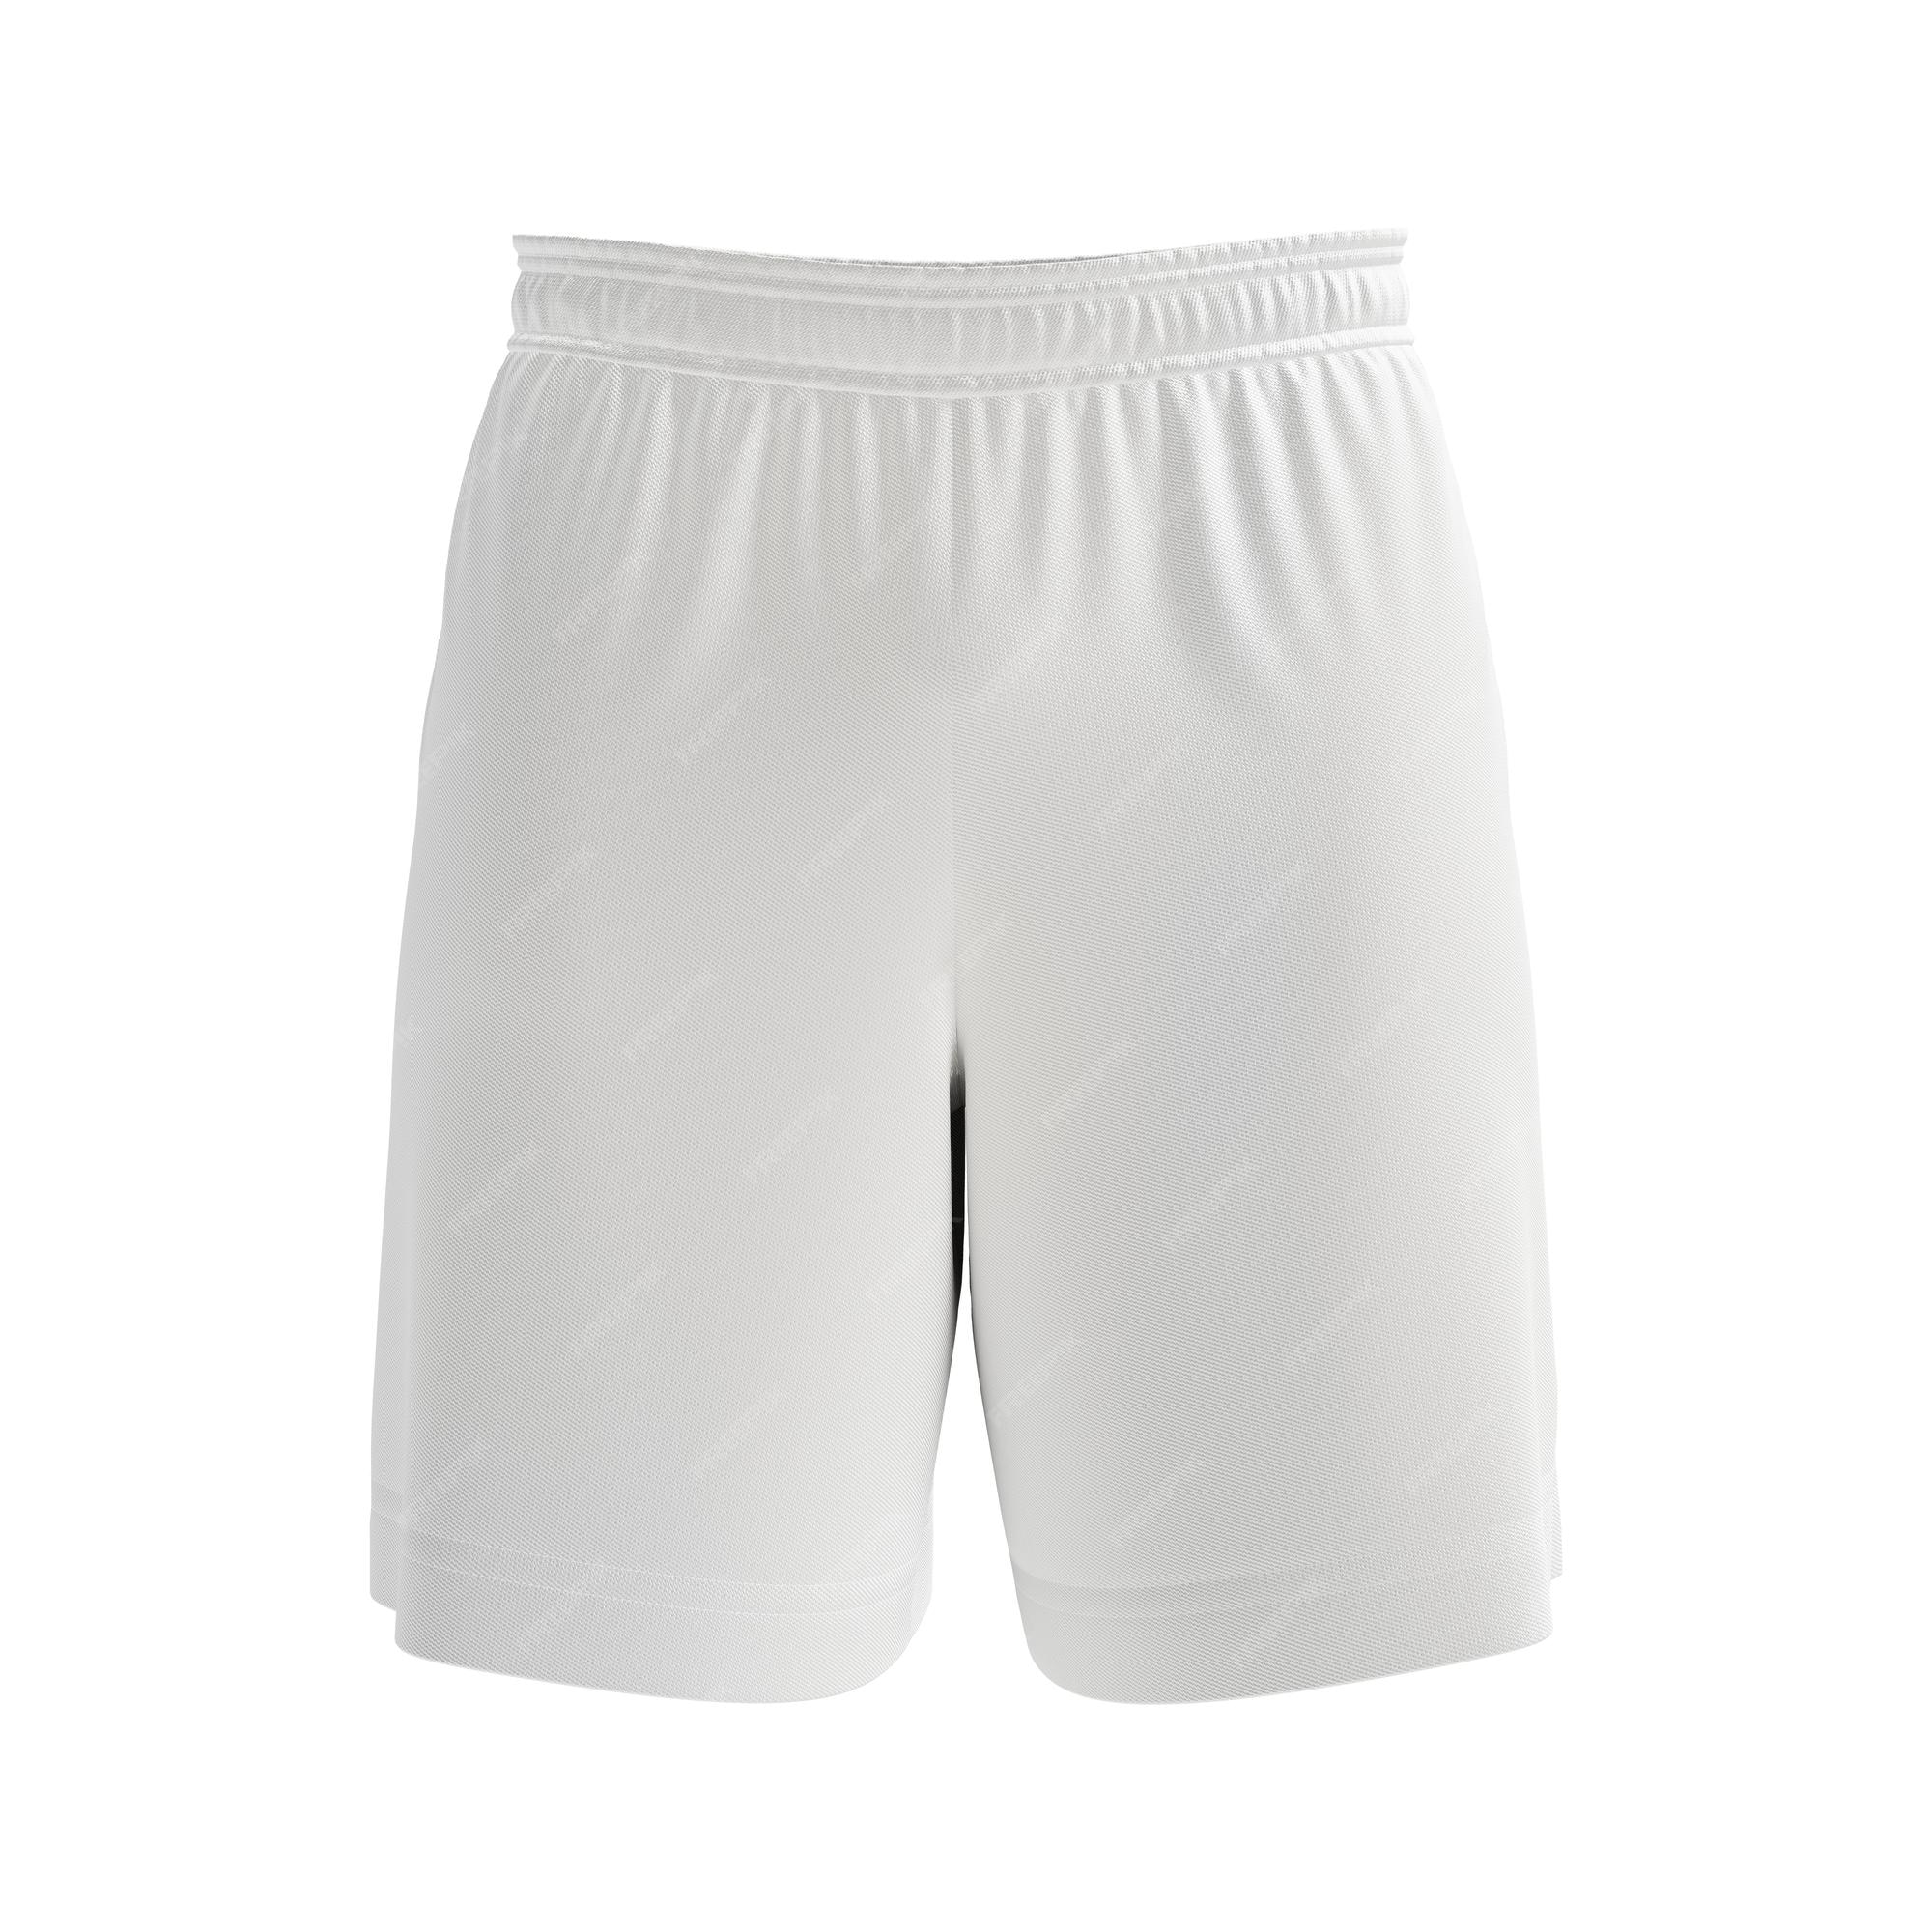 Premium Photo | A blank soccer shorts image isolated on a white background